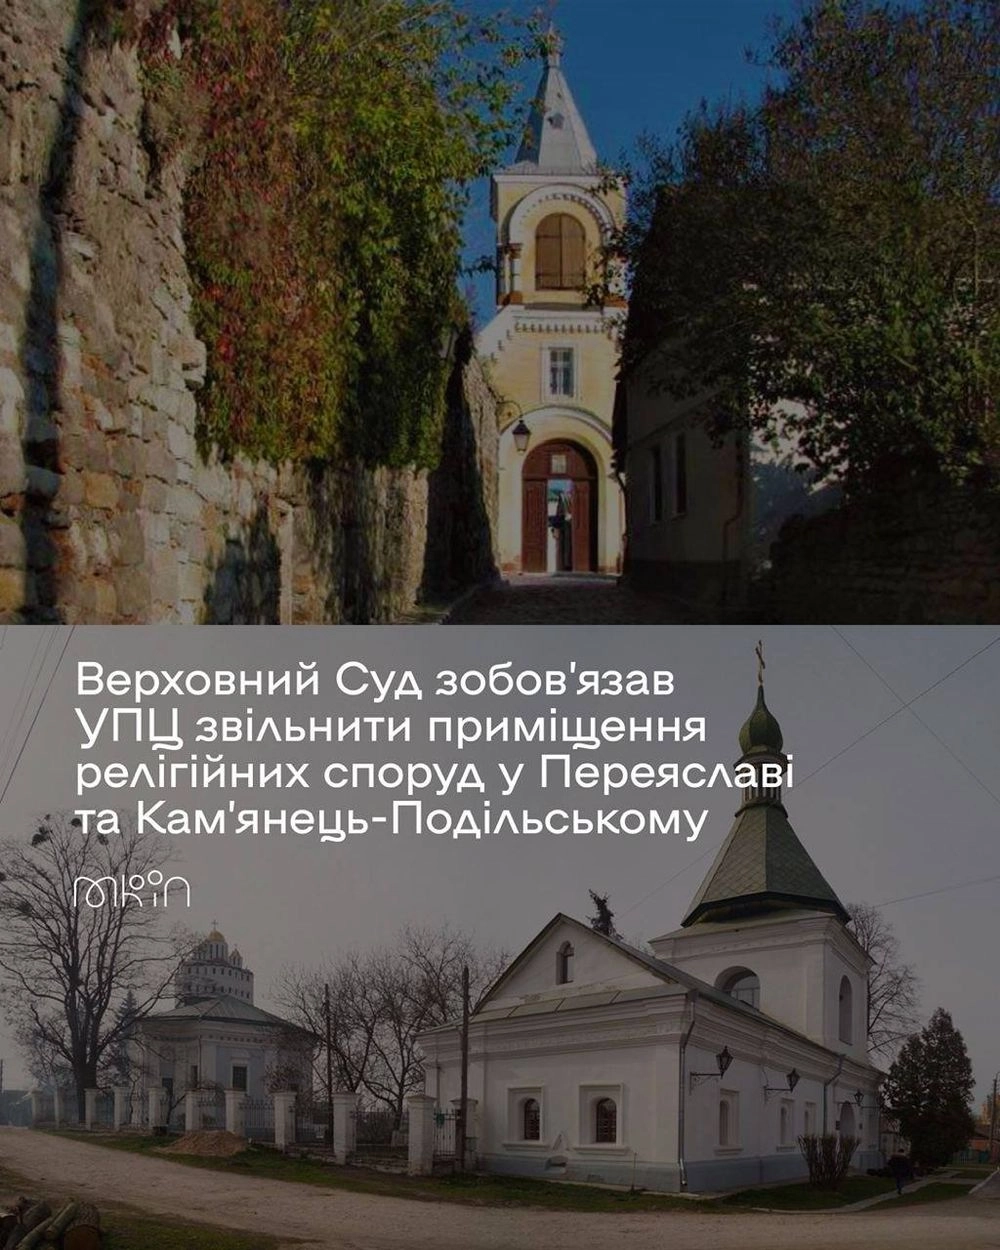 Court orders UOC to vacate churches in Pereyaslav and Kamianets-Podilskyi